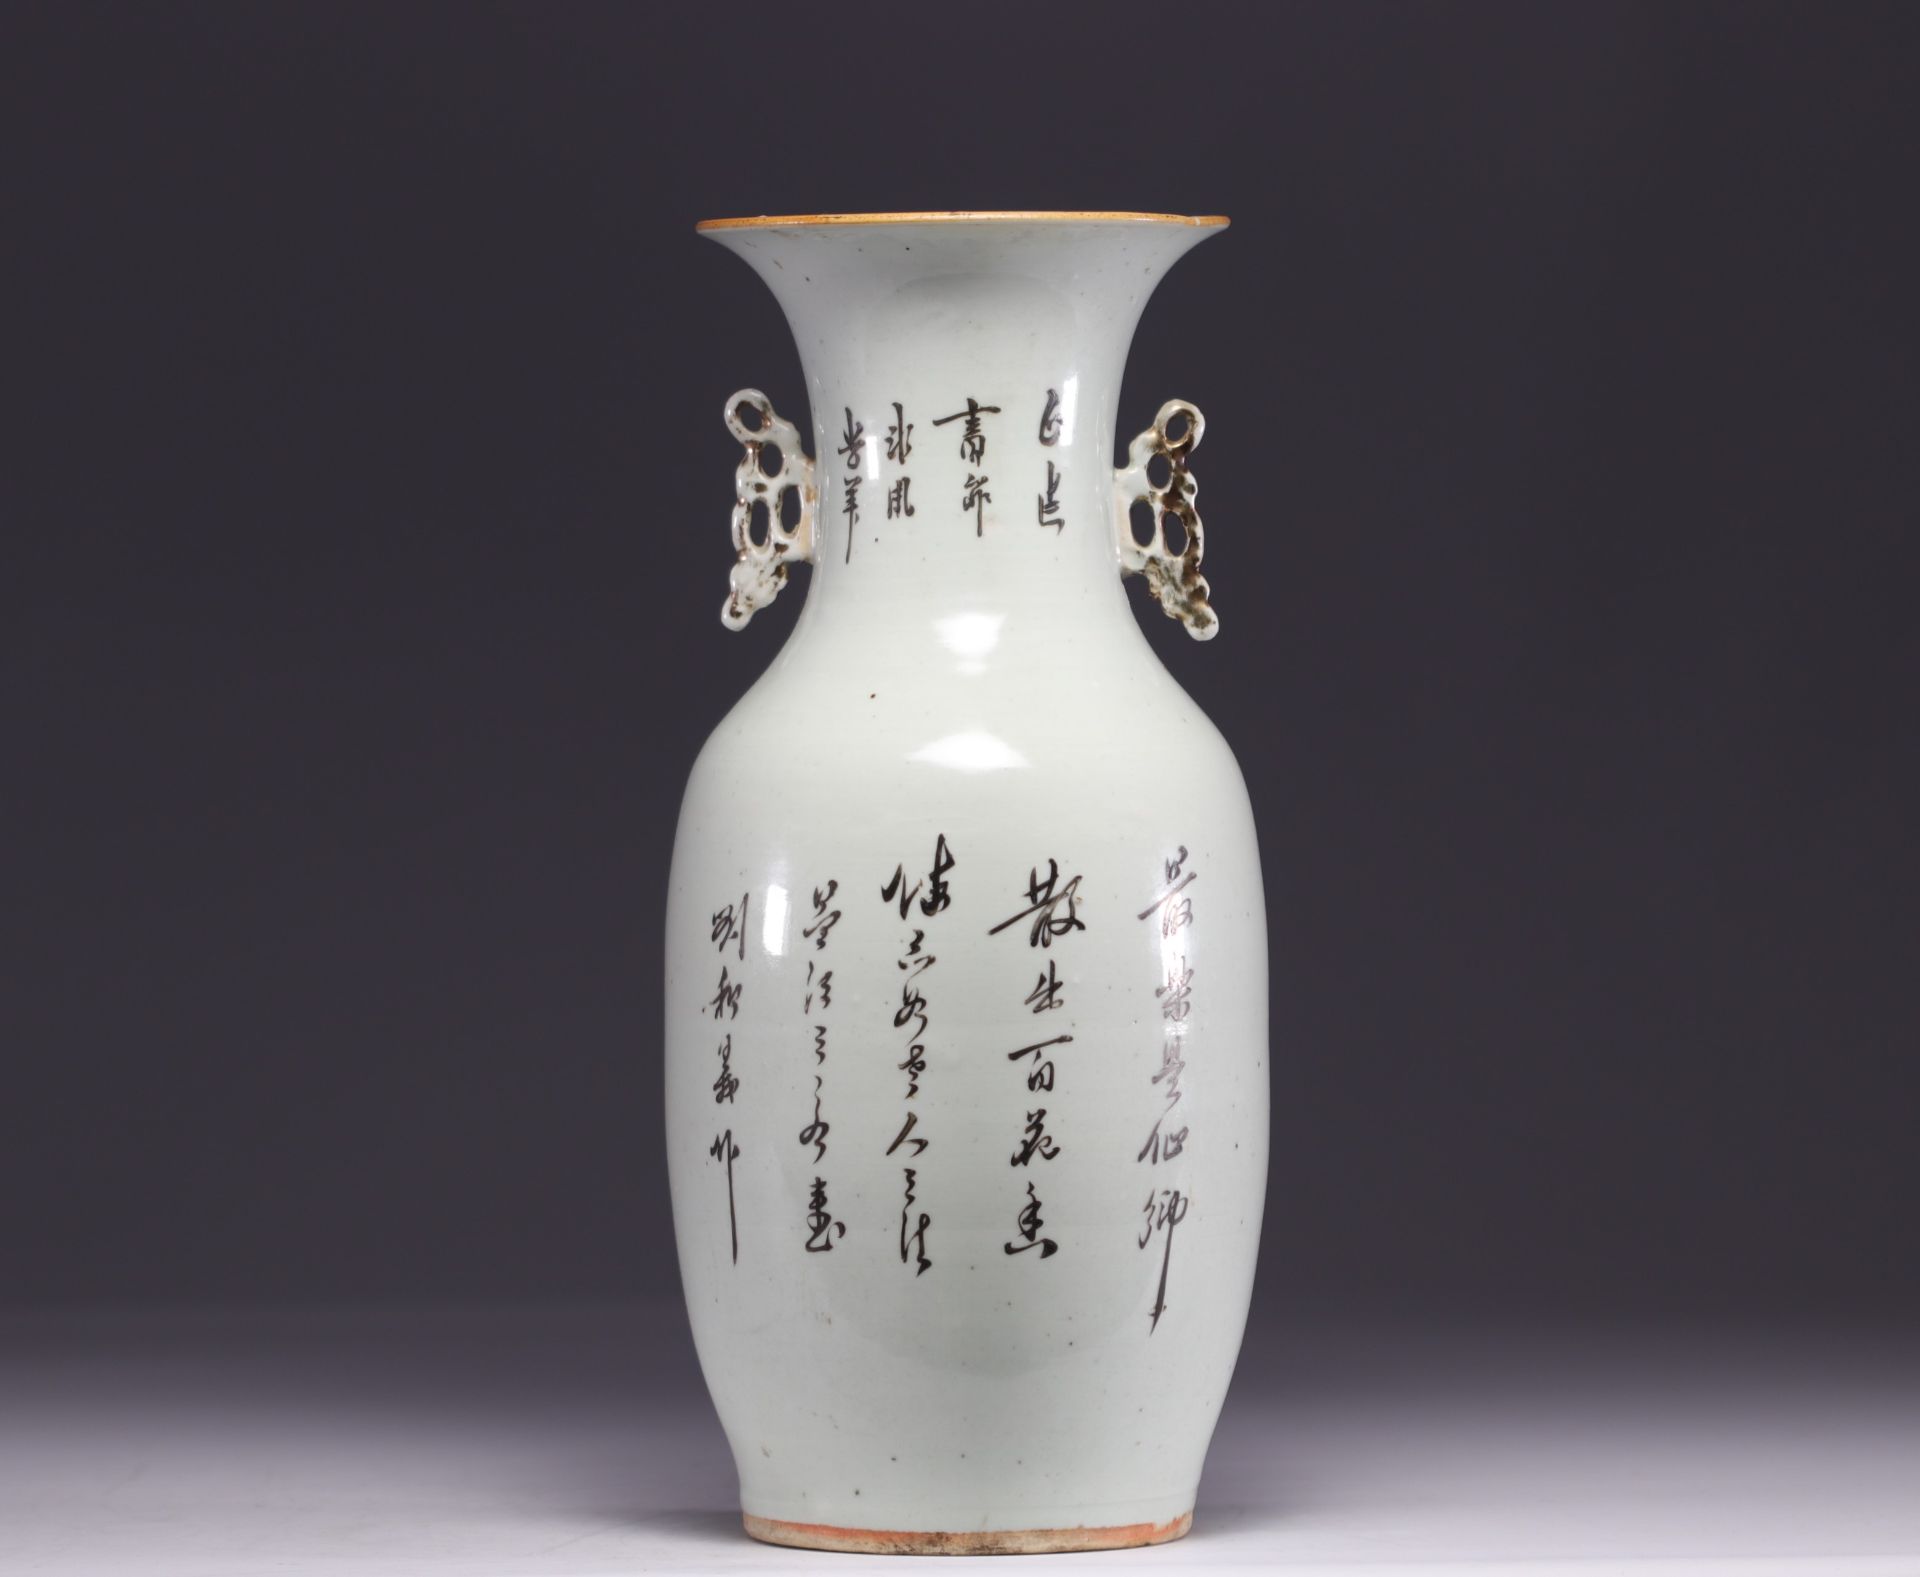 China - Famille rose vase decorated with figures, early 20th century - Image 3 of 5